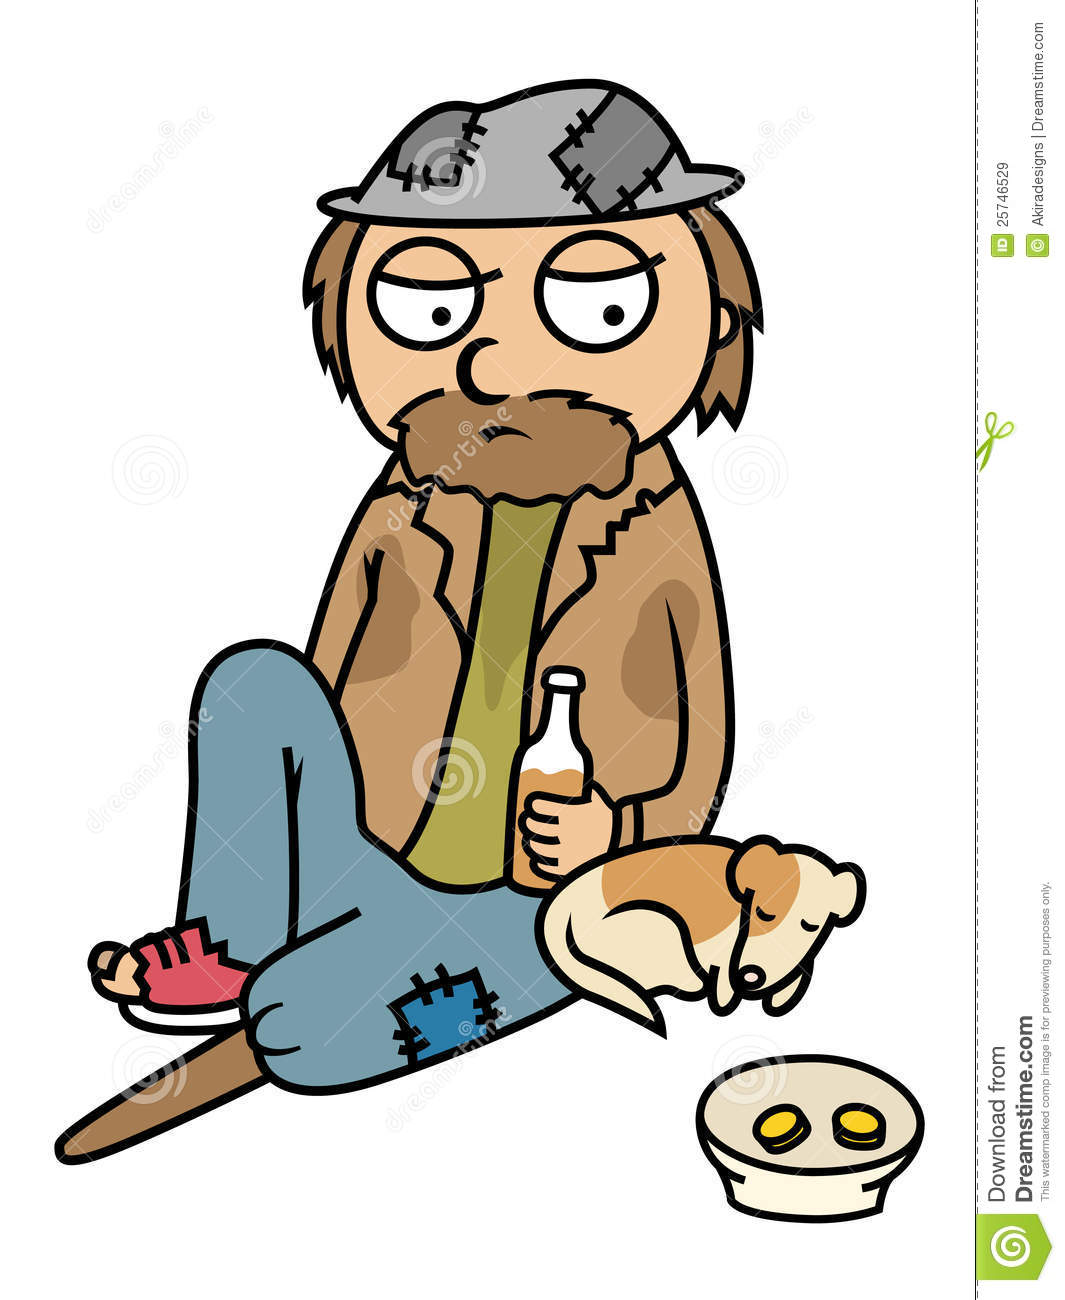 Drunk Homeless Man Begging With Dog Royalty Free Stock Images   Image